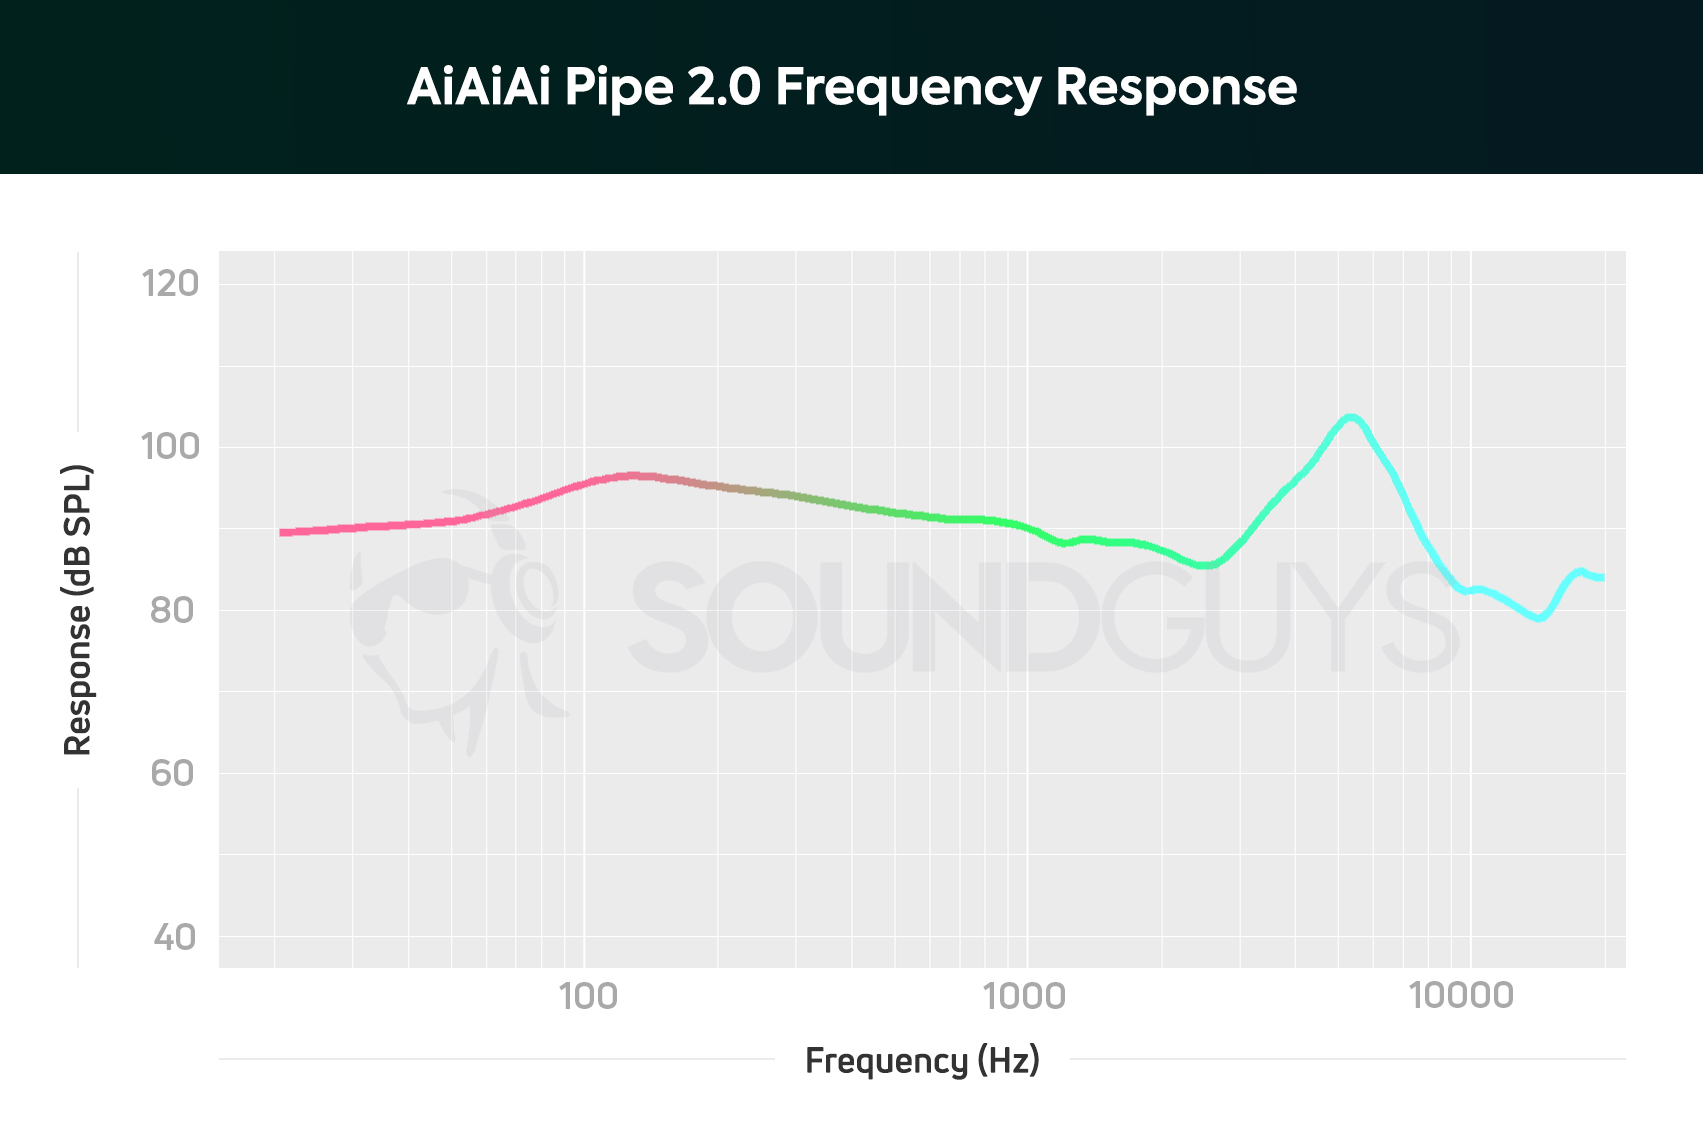 AiAiAi Pipe 2.0: A chart showing the note emphasis and frequency response of the AiAiAi Pipe 2.0.